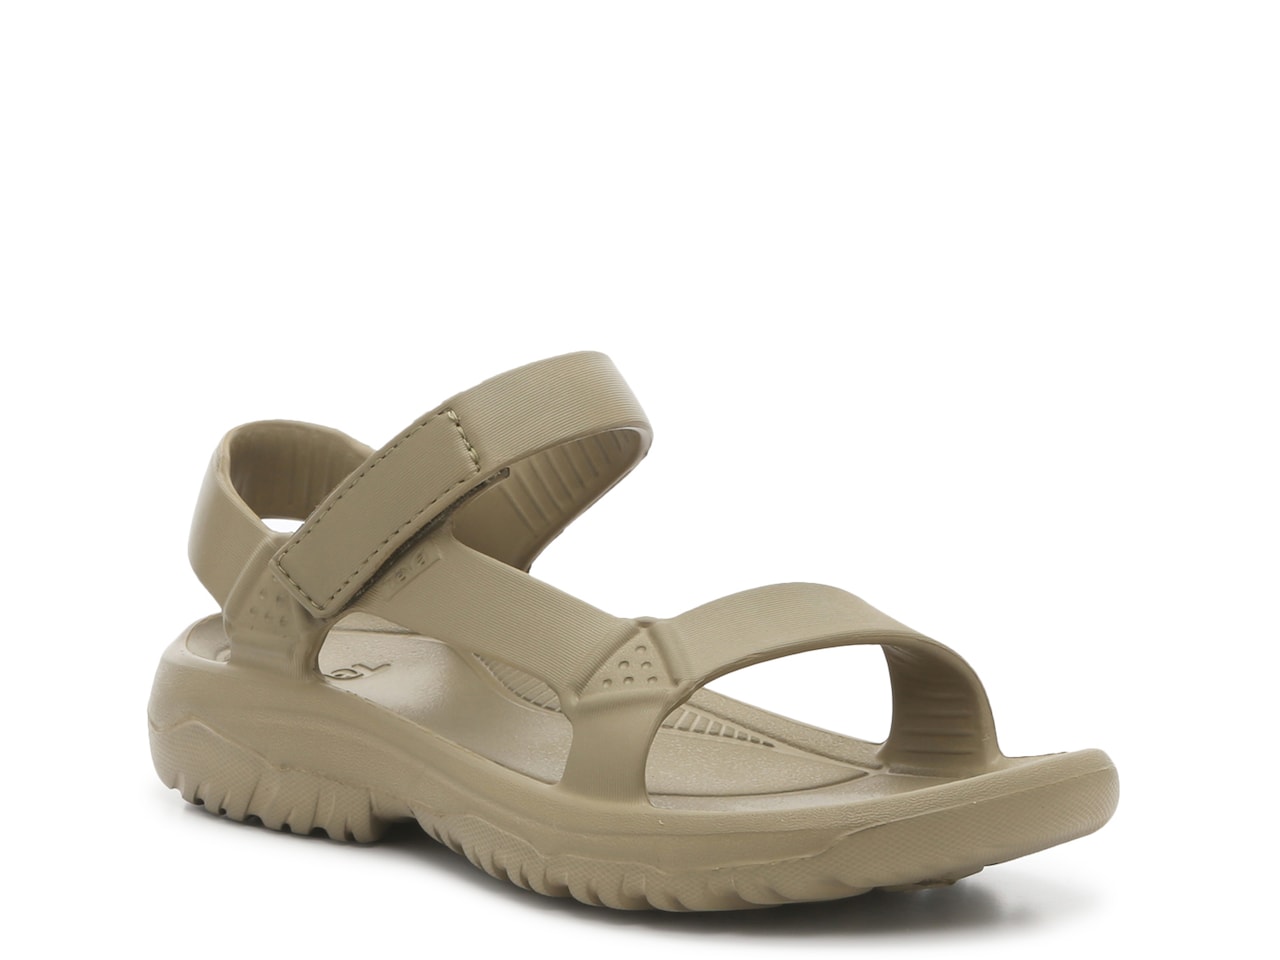 A pair of hiking sandals, color khaki.